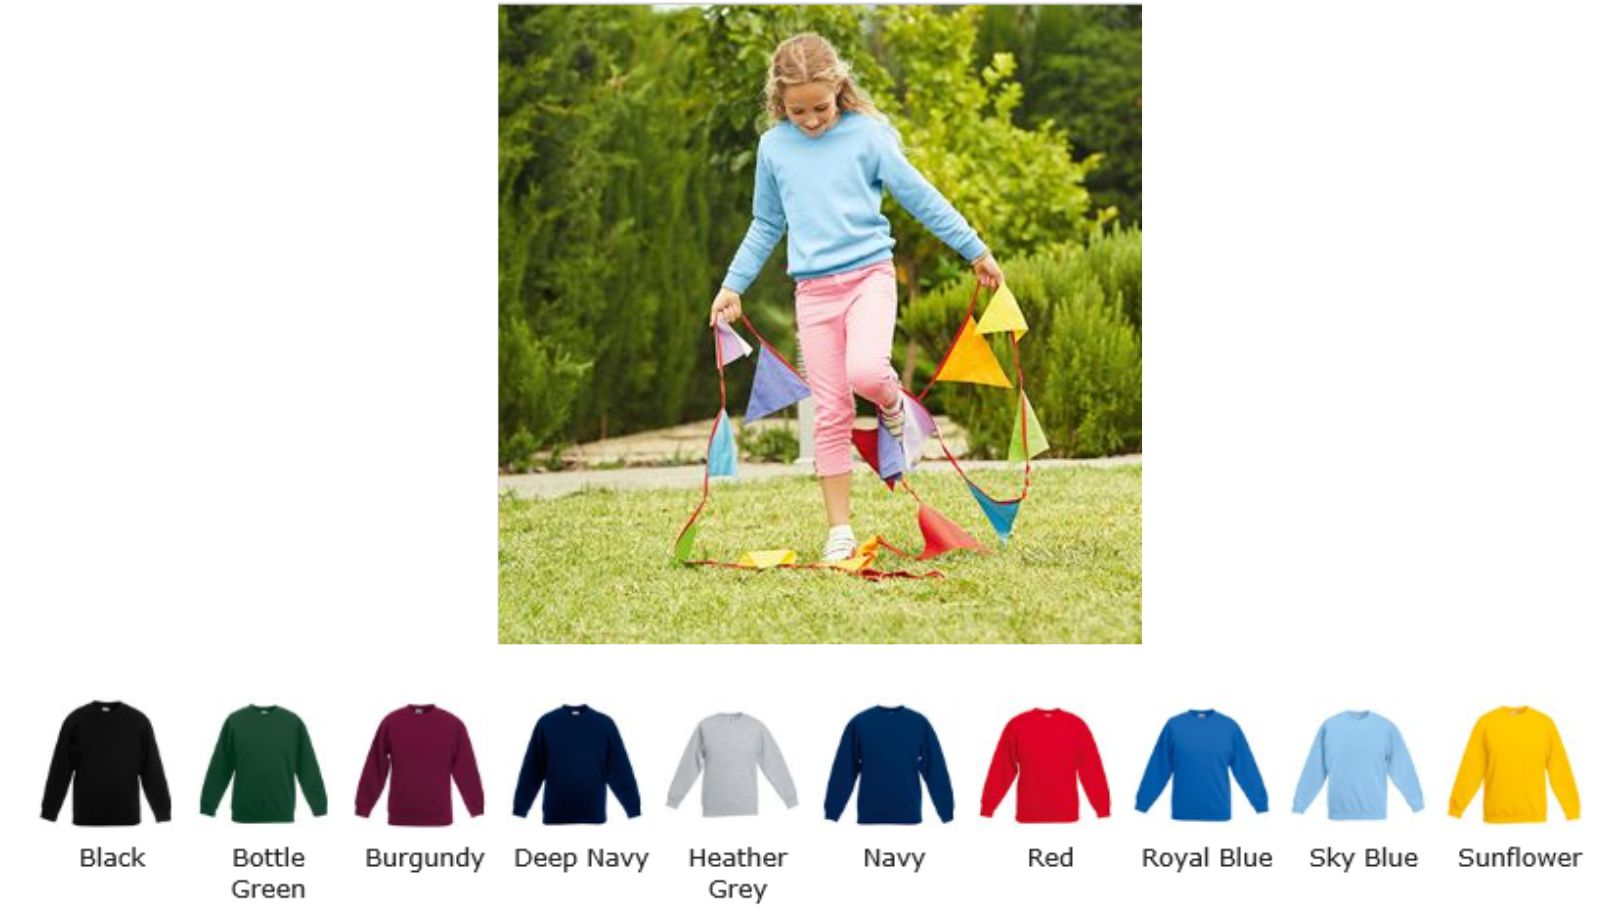 Fruit Of The Loom SS27B Classic Set in Sleeve Sweatshirt - Click Image to Close